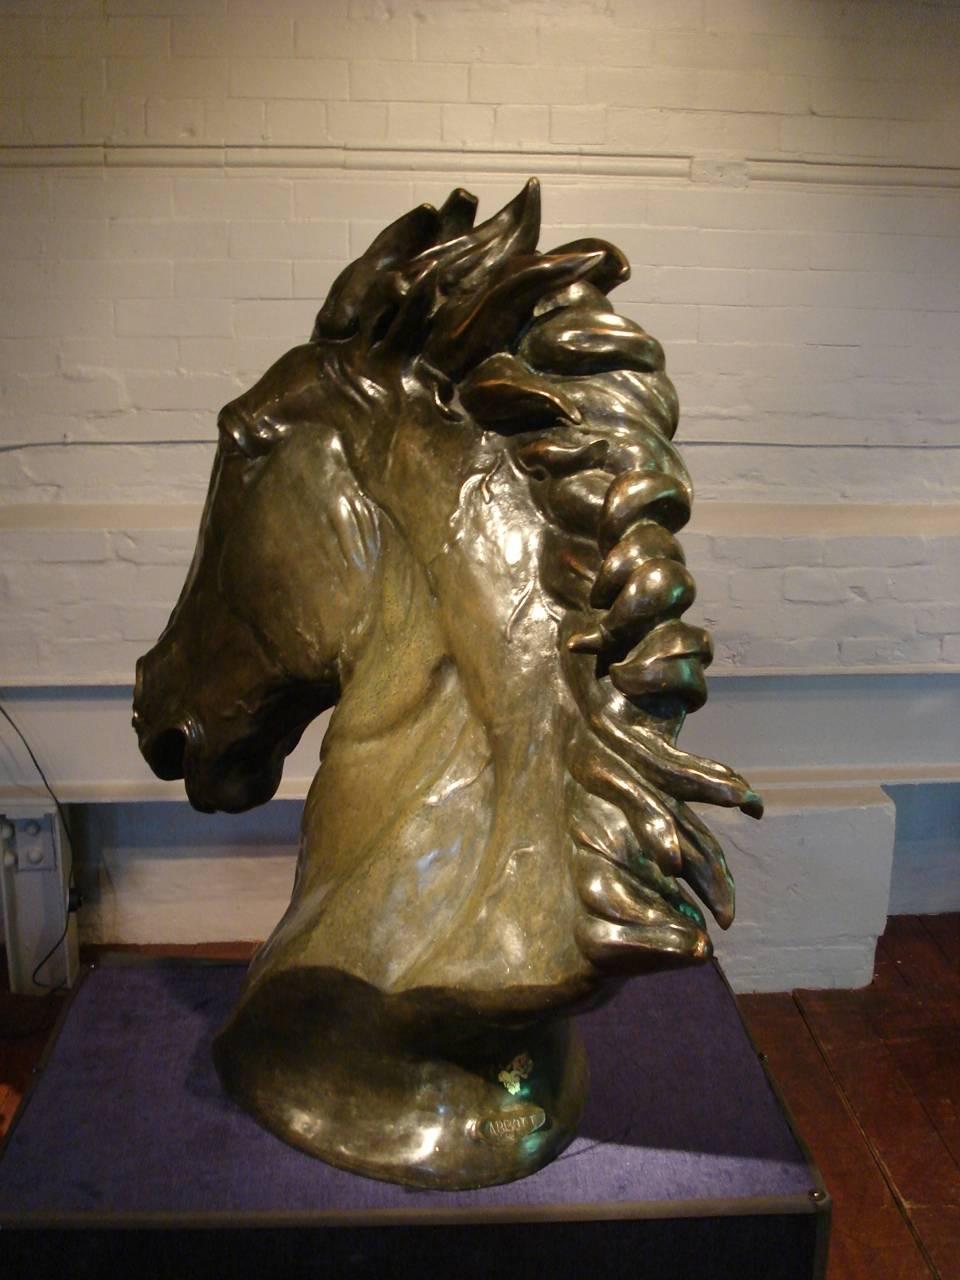 Using the lost wax technique and hand patinated Abbott Van Dada has captured the very essence of the classical horse. With striking energy and movement, the exacting details illustrating the muscles and veins and fiery mane.

A Classic and